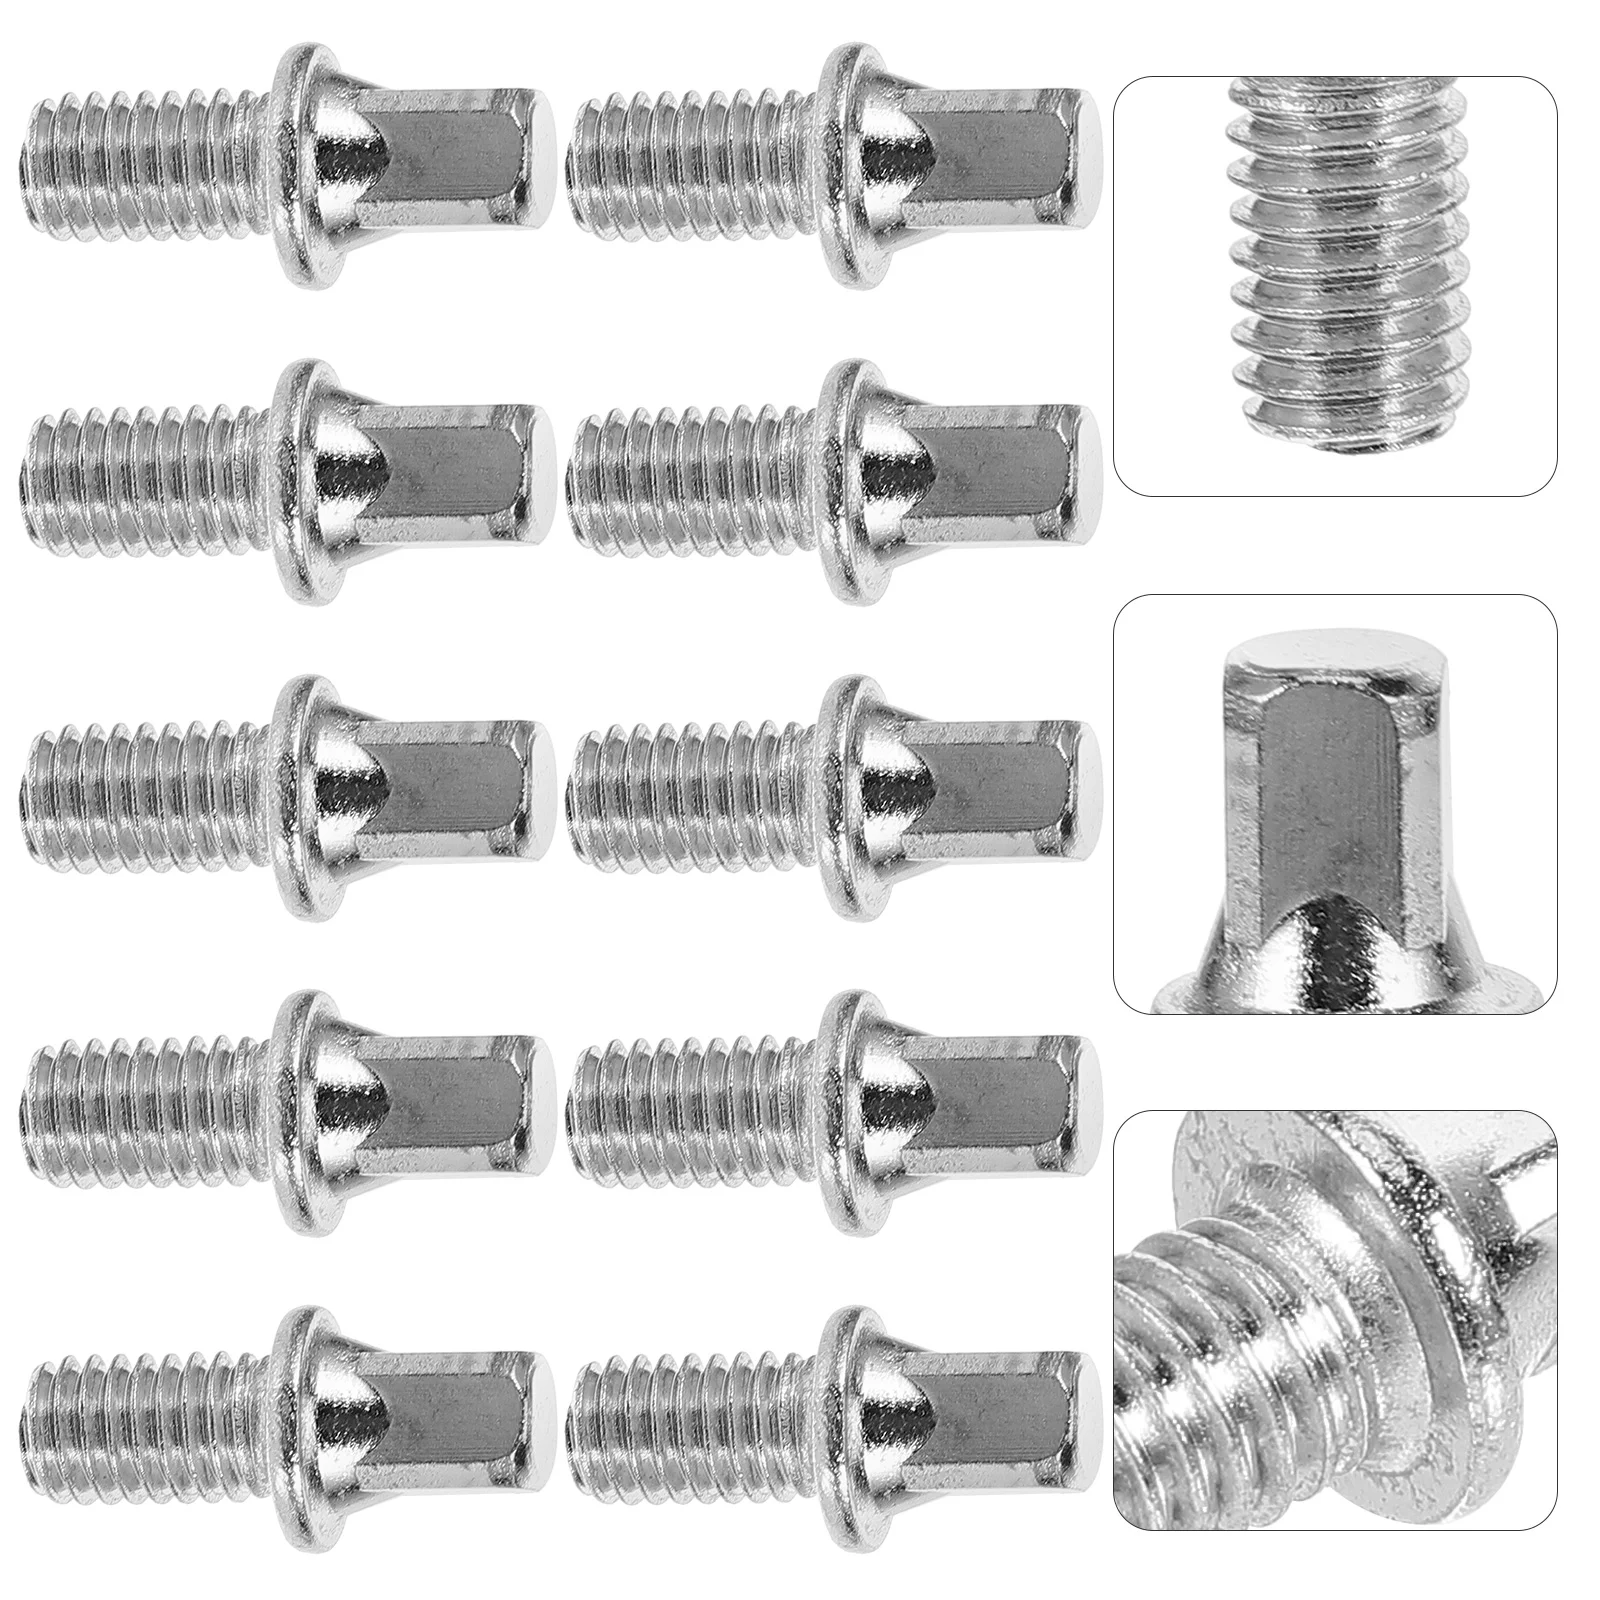 

10 Pcs Drum Screw Fittings Set Accessories Bolts Pedal Shaft Bass Screws Silver Plated Iron Jazz Hardware